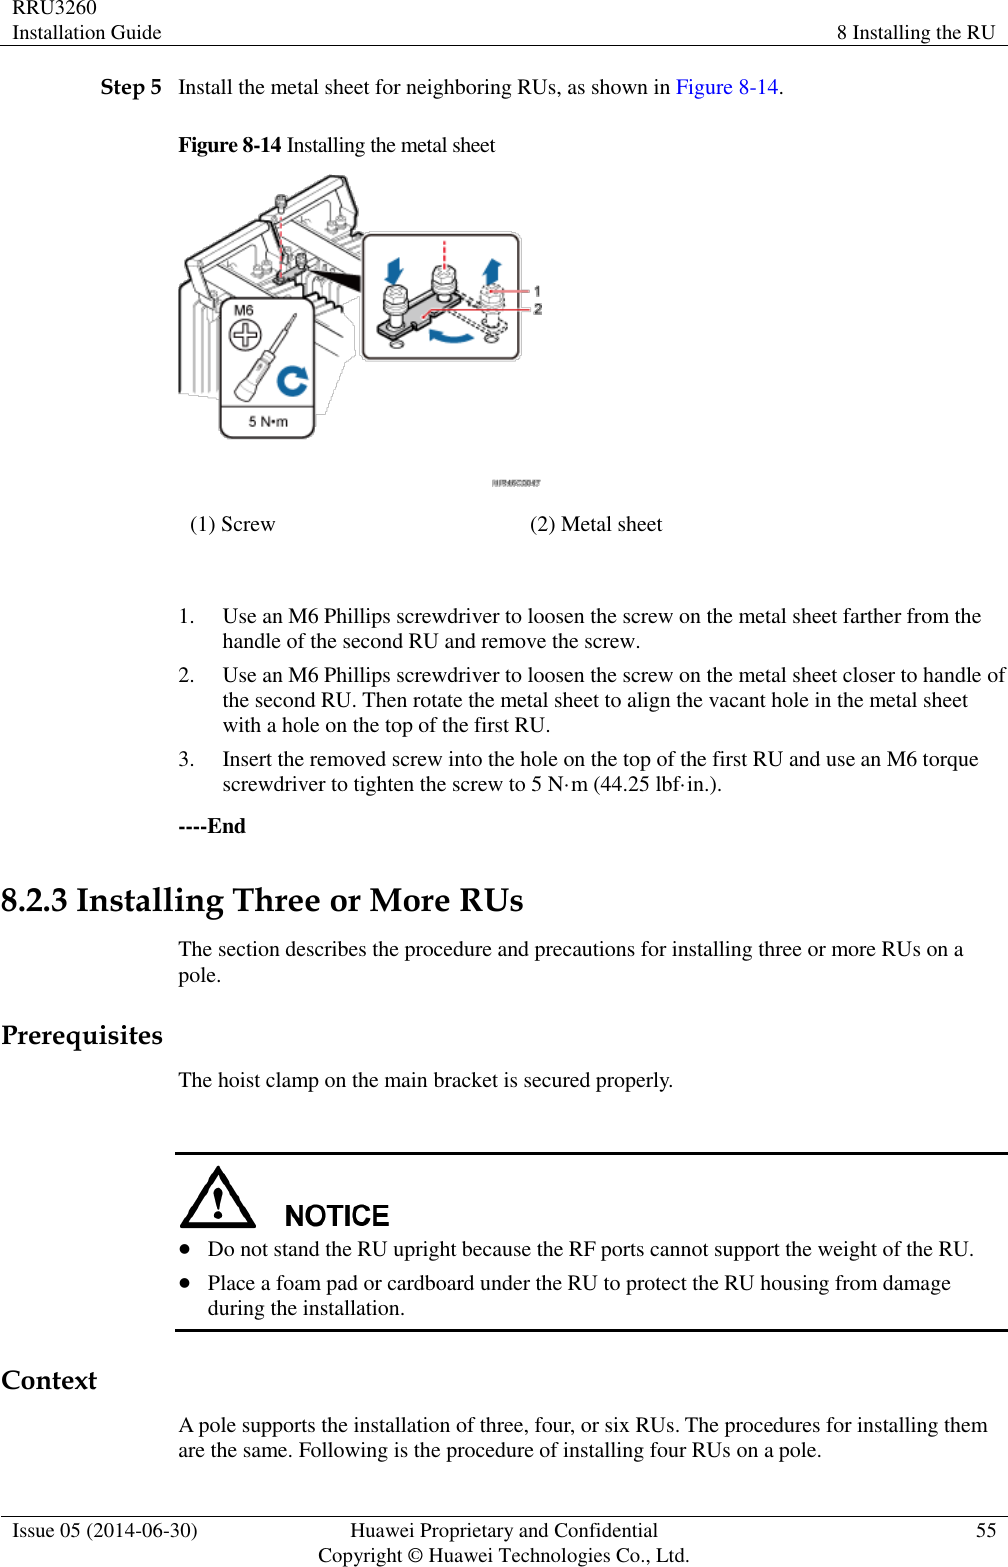 RRU3260 Installation Guide 8 Installing the RU  Issue 05 (2014-06-30) Huawei Proprietary and Confidential                                     Copyright © Huawei Technologies Co., Ltd. 55  Step 5 Install the metal sheet for neighboring RUs, as shown in Figure 8-14. Figure 8-14 Installing the metal sheet  (1) Screw (2) Metal sheet  1. Use an M6 Phillips screwdriver to loosen the screw on the metal sheet farther from the handle of the second RU and remove the screw. 2. Use an M6 Phillips screwdriver to loosen the screw on the metal sheet closer to handle of the second RU. Then rotate the metal sheet to align the vacant hole in the metal sheet with a hole on the top of the first RU. 3. Insert the removed screw into the hole on the top of the first RU and use an M6 torque screwdriver to tighten the screw to 5 N·m (44.25 lbf·in.). ----End 8.2.3 Installing Three or More RUs The section describes the procedure and precautions for installing three or more RUs on a pole. Prerequisites The hoist clamp on the main bracket is secured properly.    Do not stand the RU upright because the RF ports cannot support the weight of the RU.  Place a foam pad or cardboard under the RU to protect the RU housing from damage during the installation. Context A pole supports the installation of three, four, or six RUs. The procedures for installing them are the same. Following is the procedure of installing four RUs on a pole. 